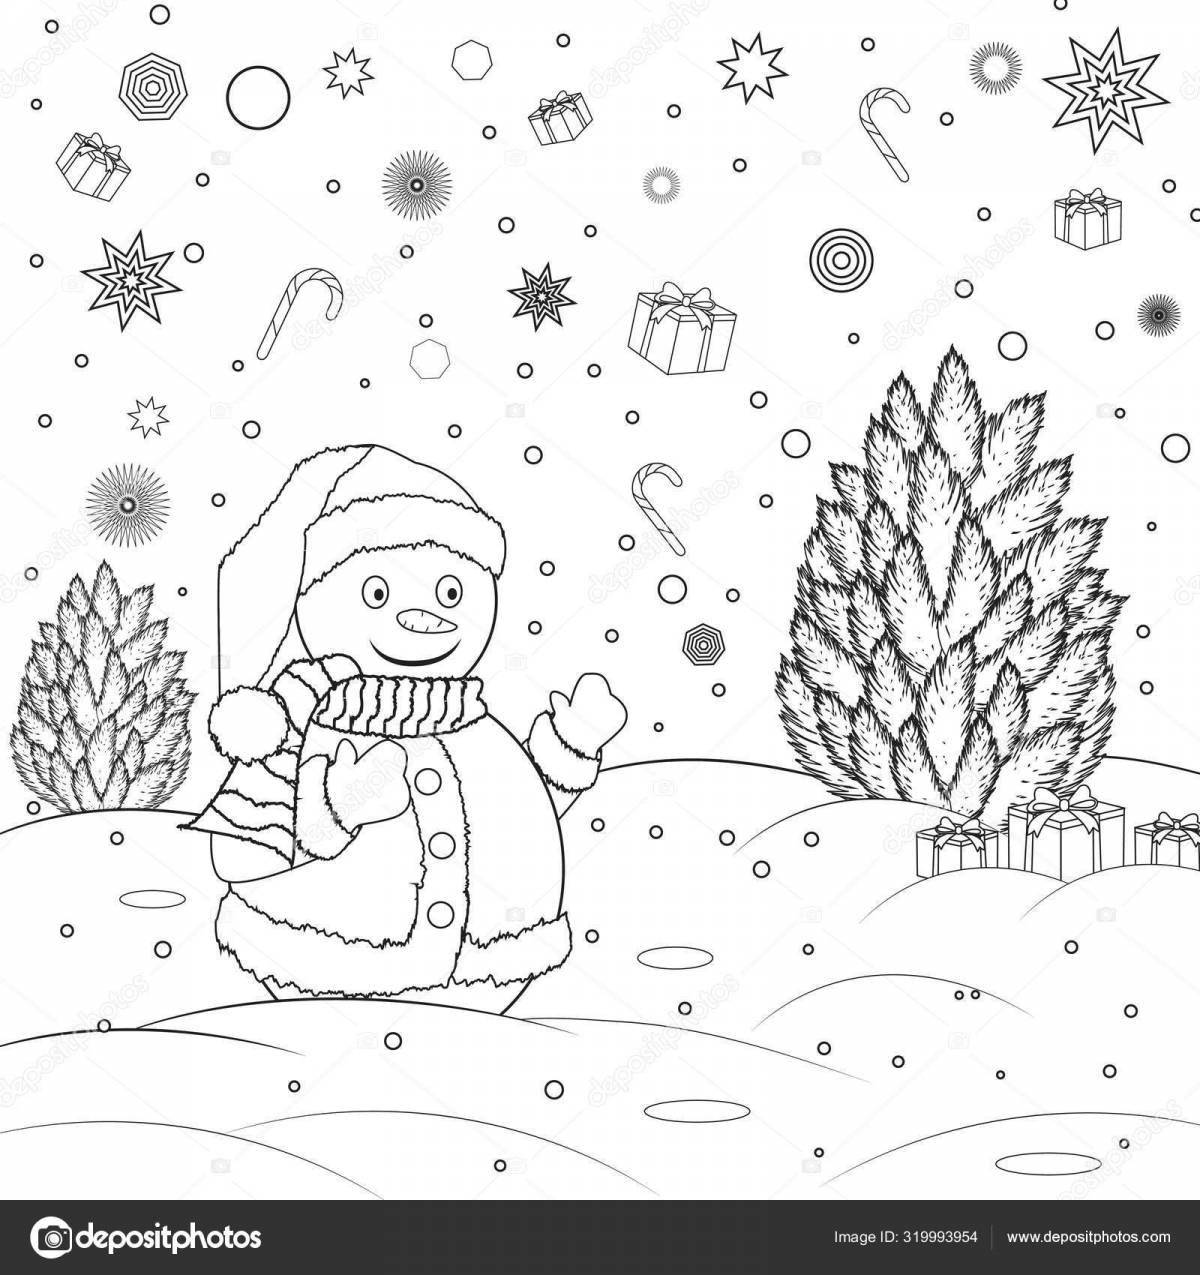 Amazing snow coloring book for kids